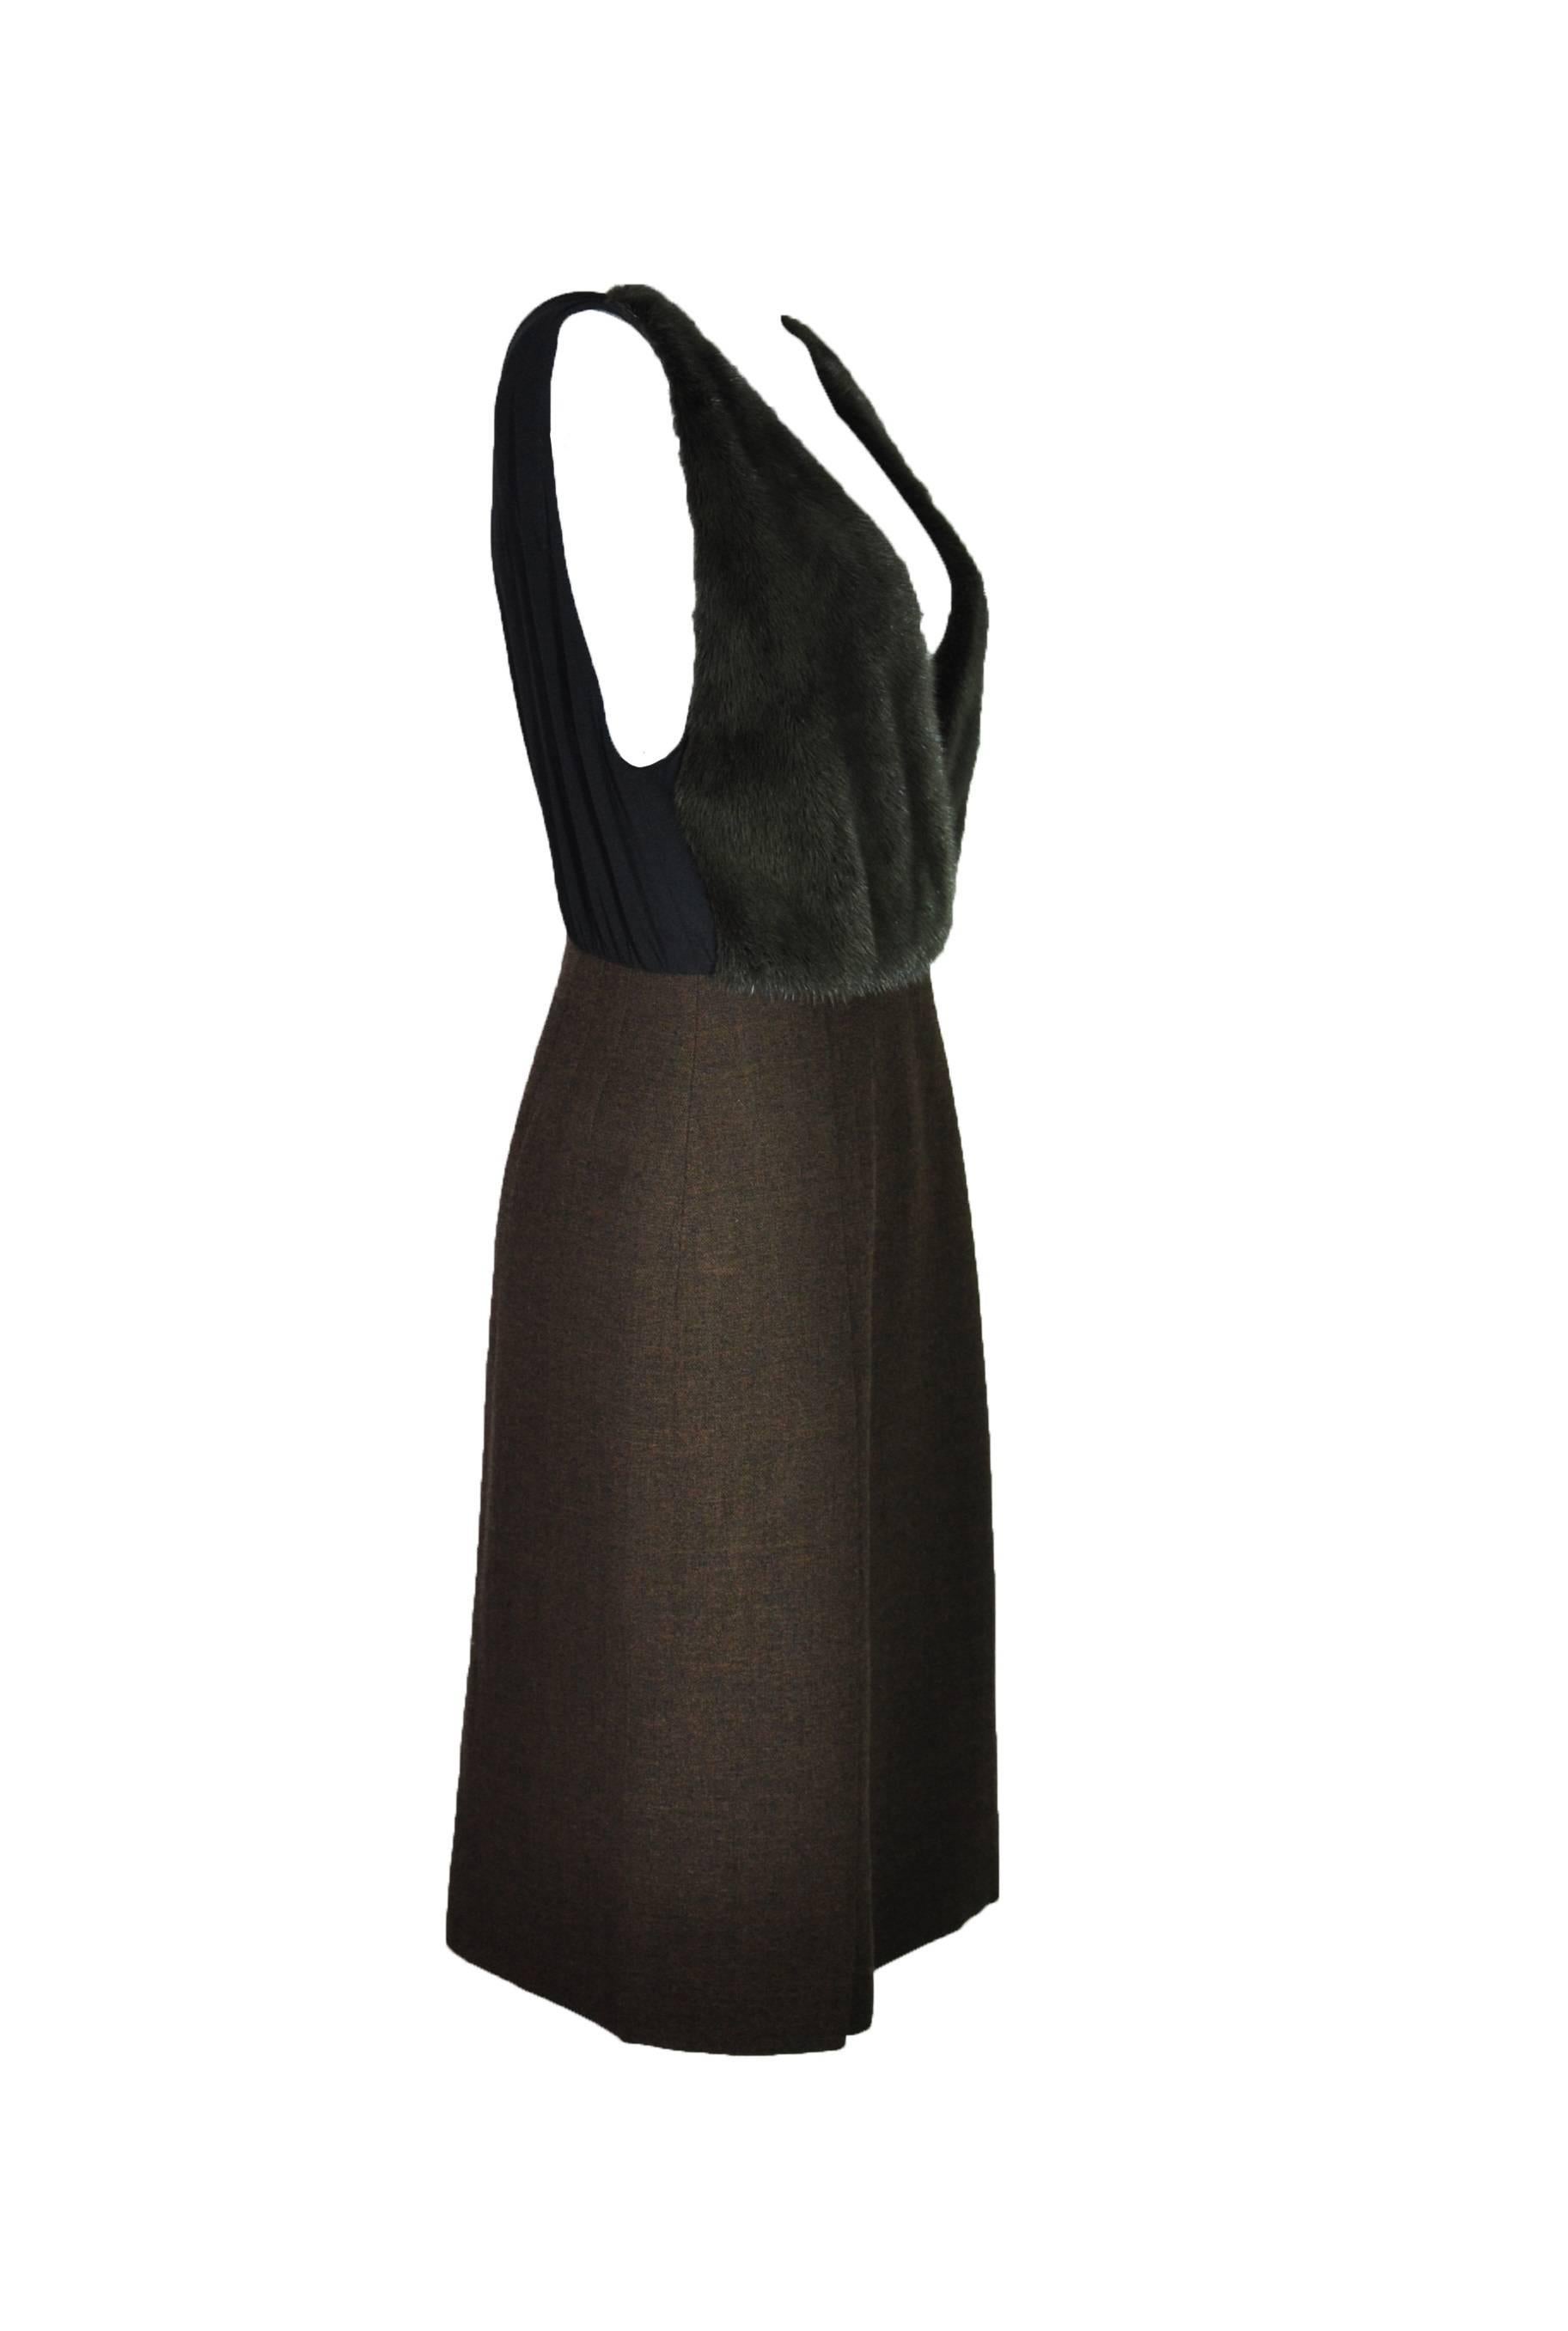 Prada  Bi-color Sleeveless Deep V Neck Green Dyed Mink & Wool Dress In Excellent Condition For Sale In Hong Kong, Hong Kong